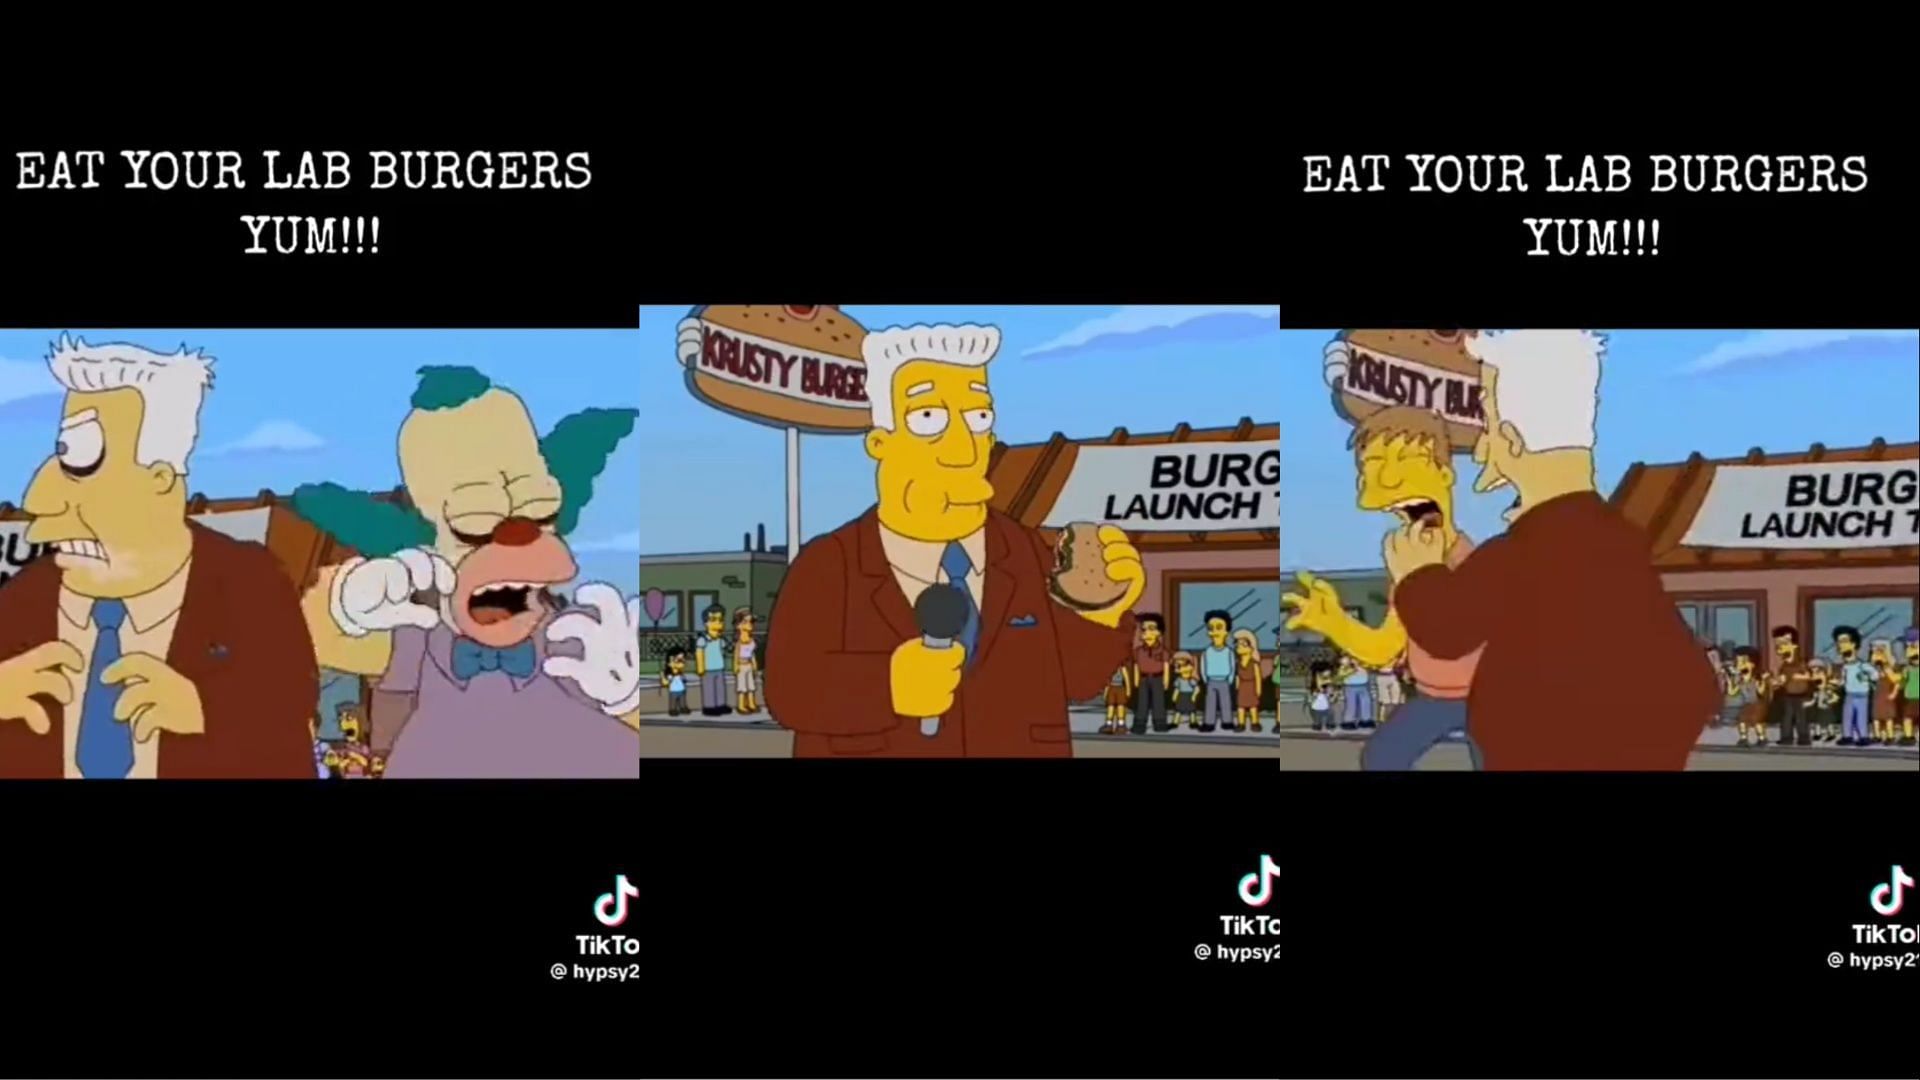 The Simpsons conspiracy theory goes viral amid National Burger Day deals (Image via hypsy217/TikTok)